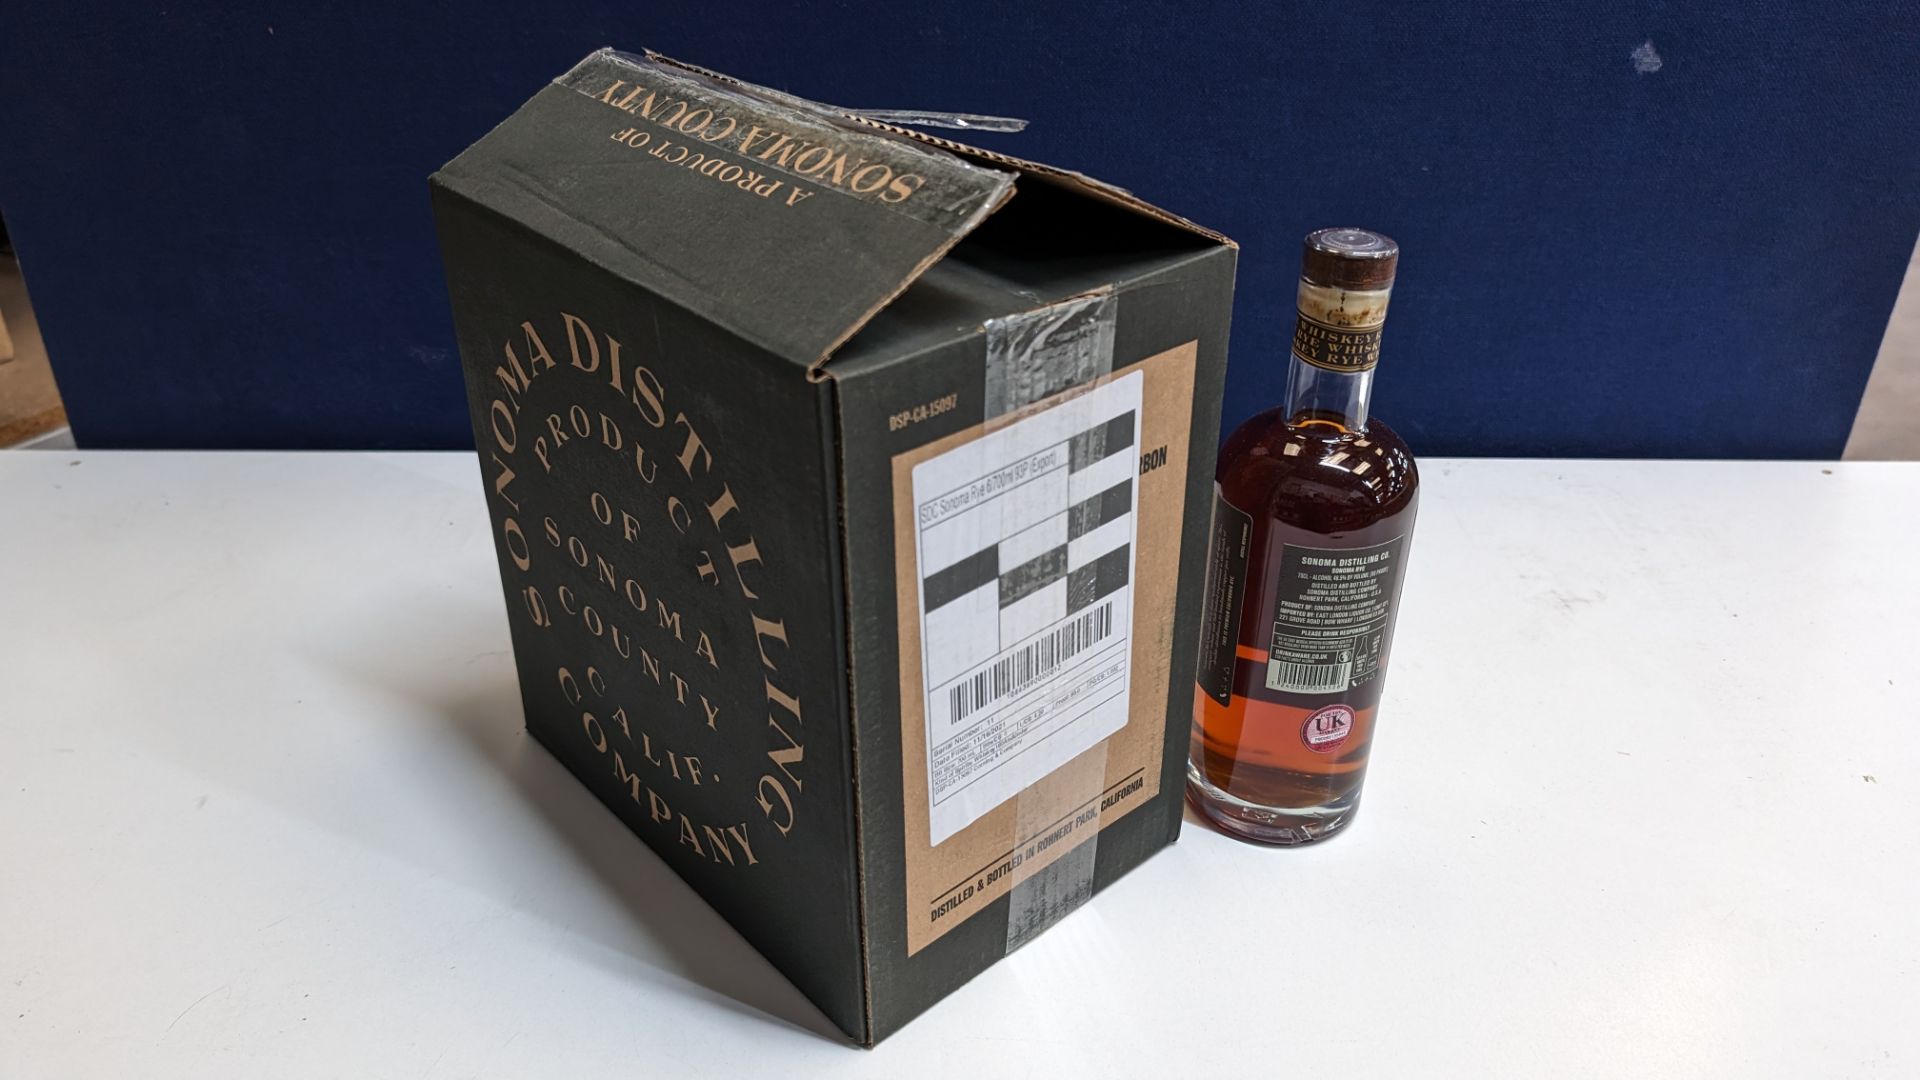 6 off 700ml bottles of Sonoma Rye Whiskey. In Sonoma branded box which includes bottling details on - Image 7 of 8